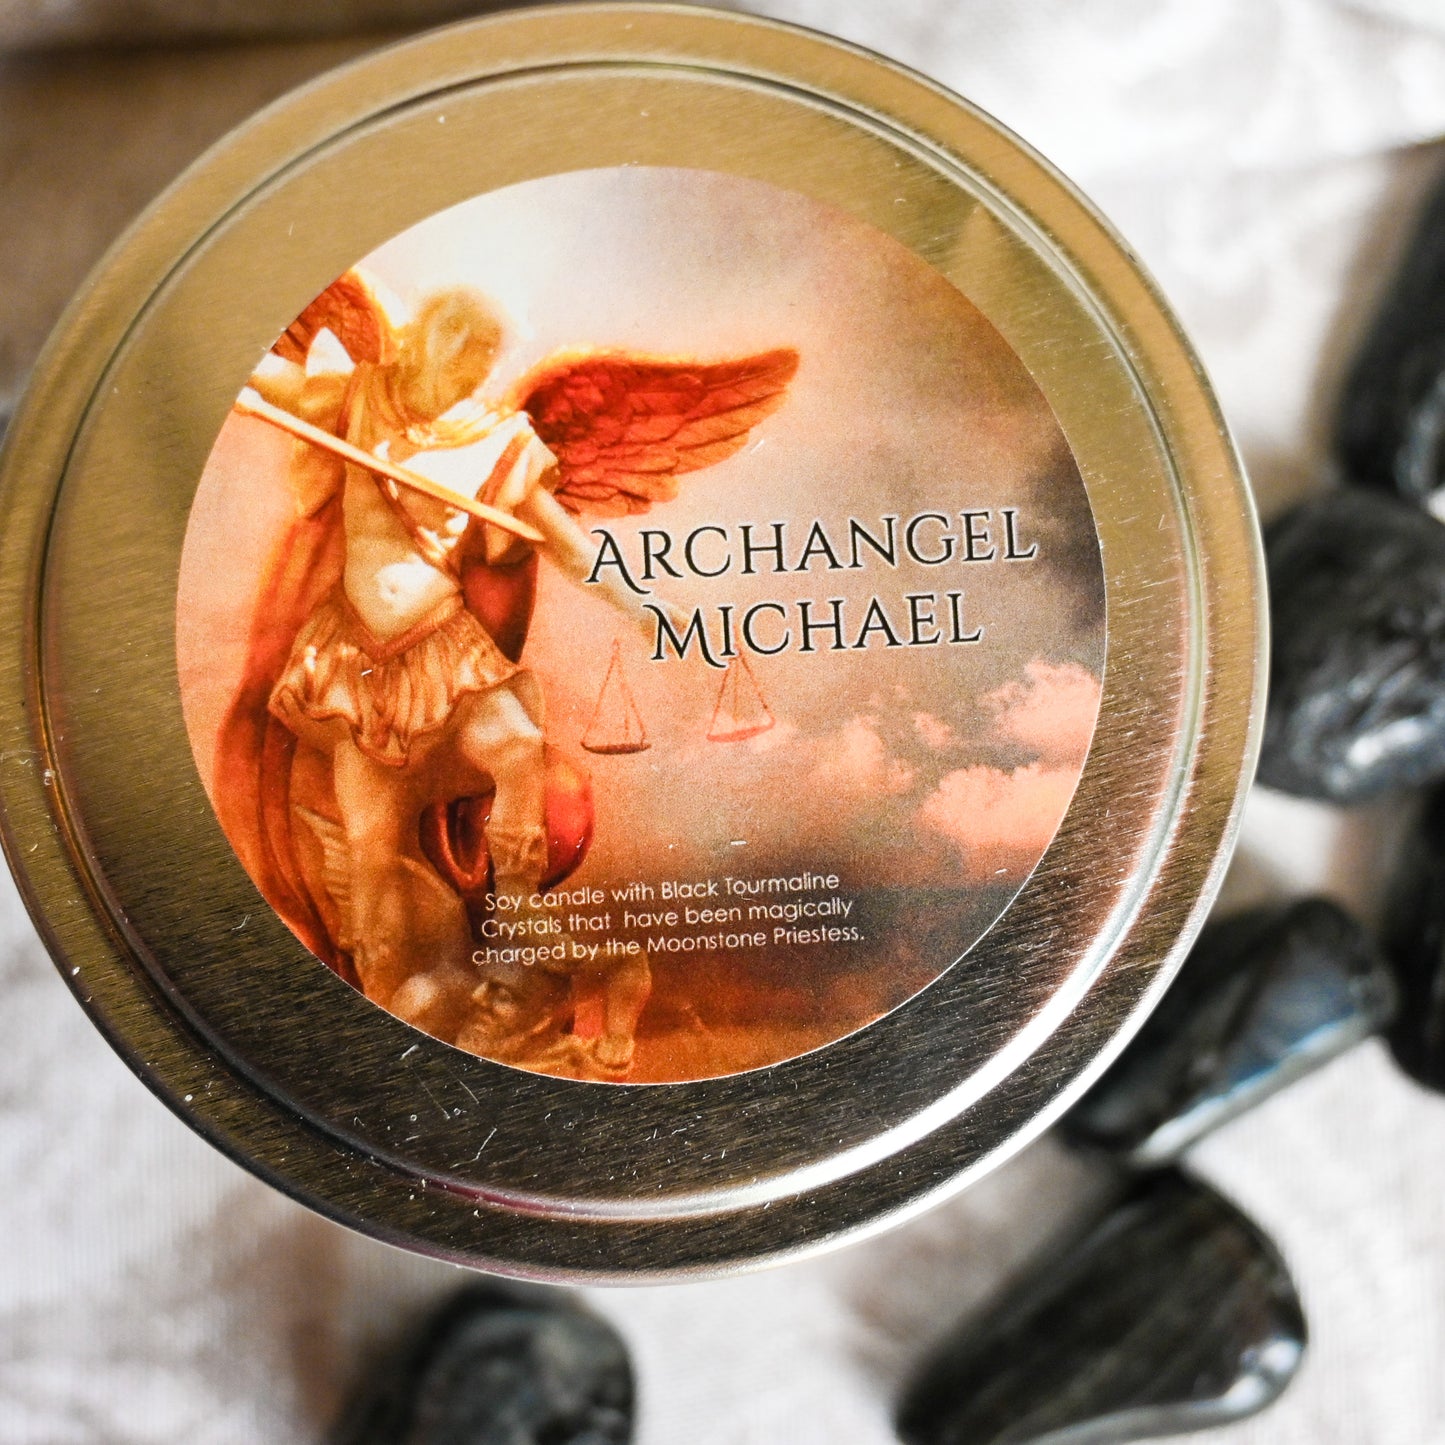 Archangel Michael Intention Candle with Black Tourmaline